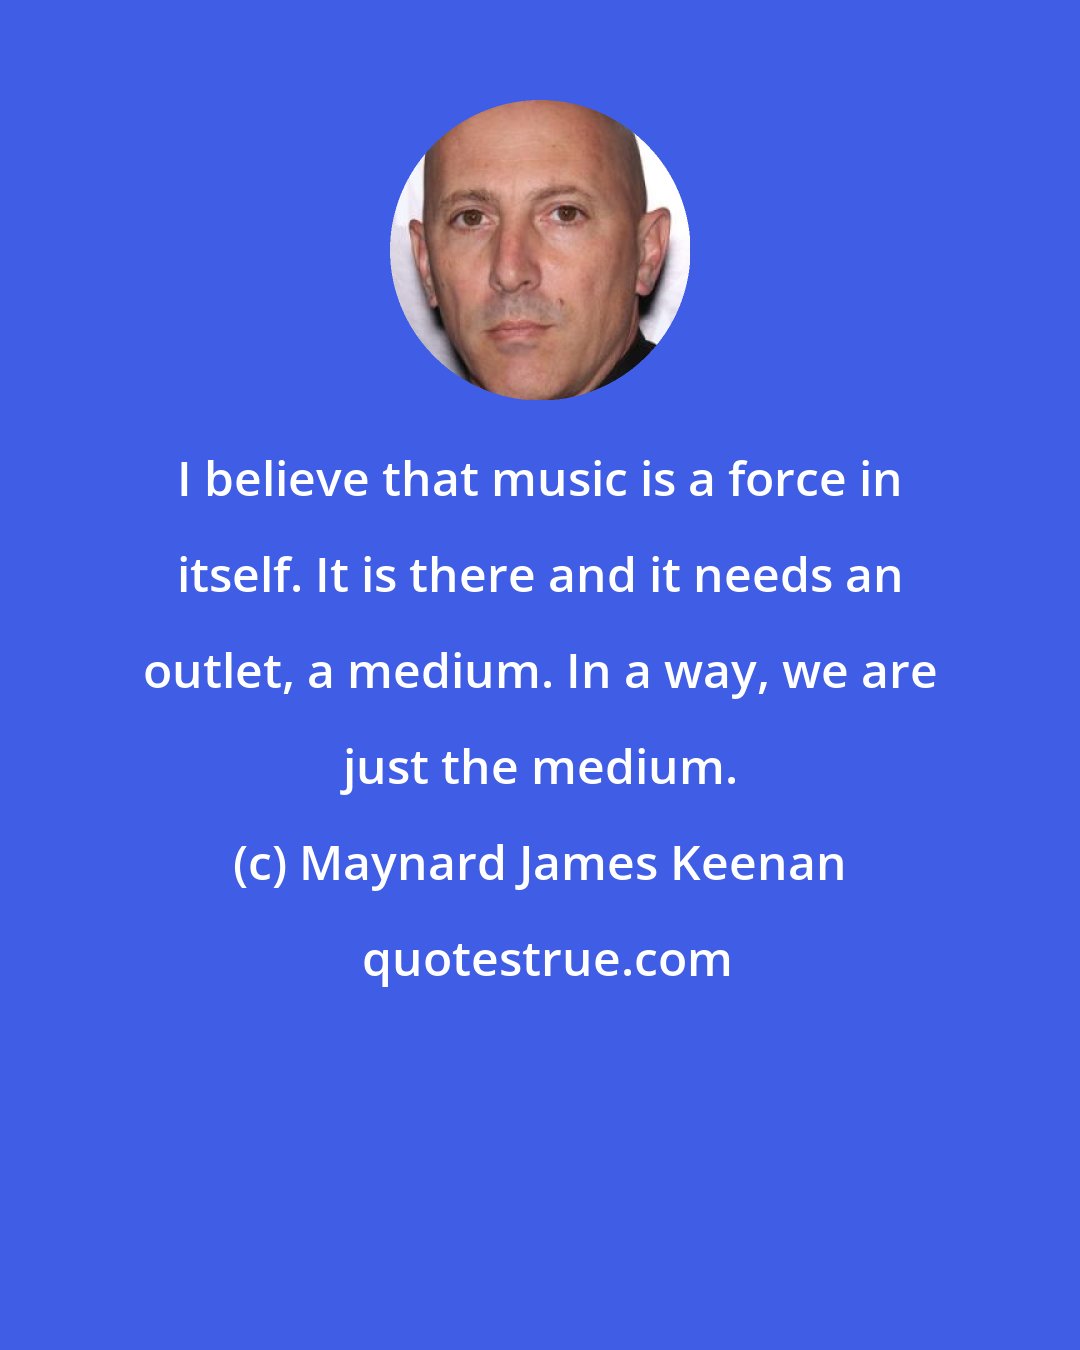 Maynard James Keenan: I believe that music is a force in itself. It is there and it needs an outlet, a medium. In a way, we are just the medium.